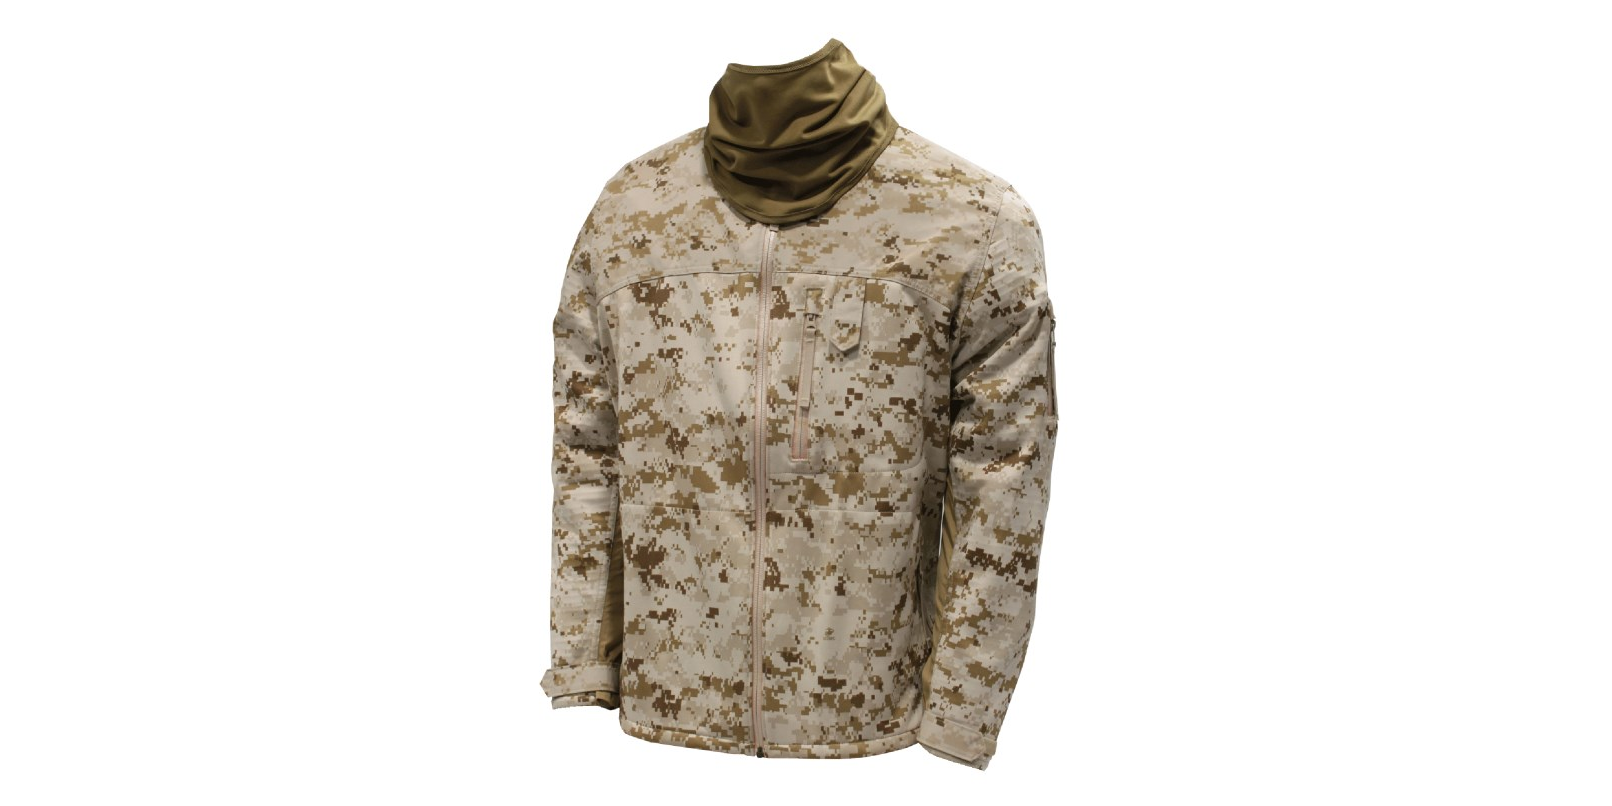 US Military Polyester Wicking THERMAL UNDERWEAR LWCWUS SHIRT Light